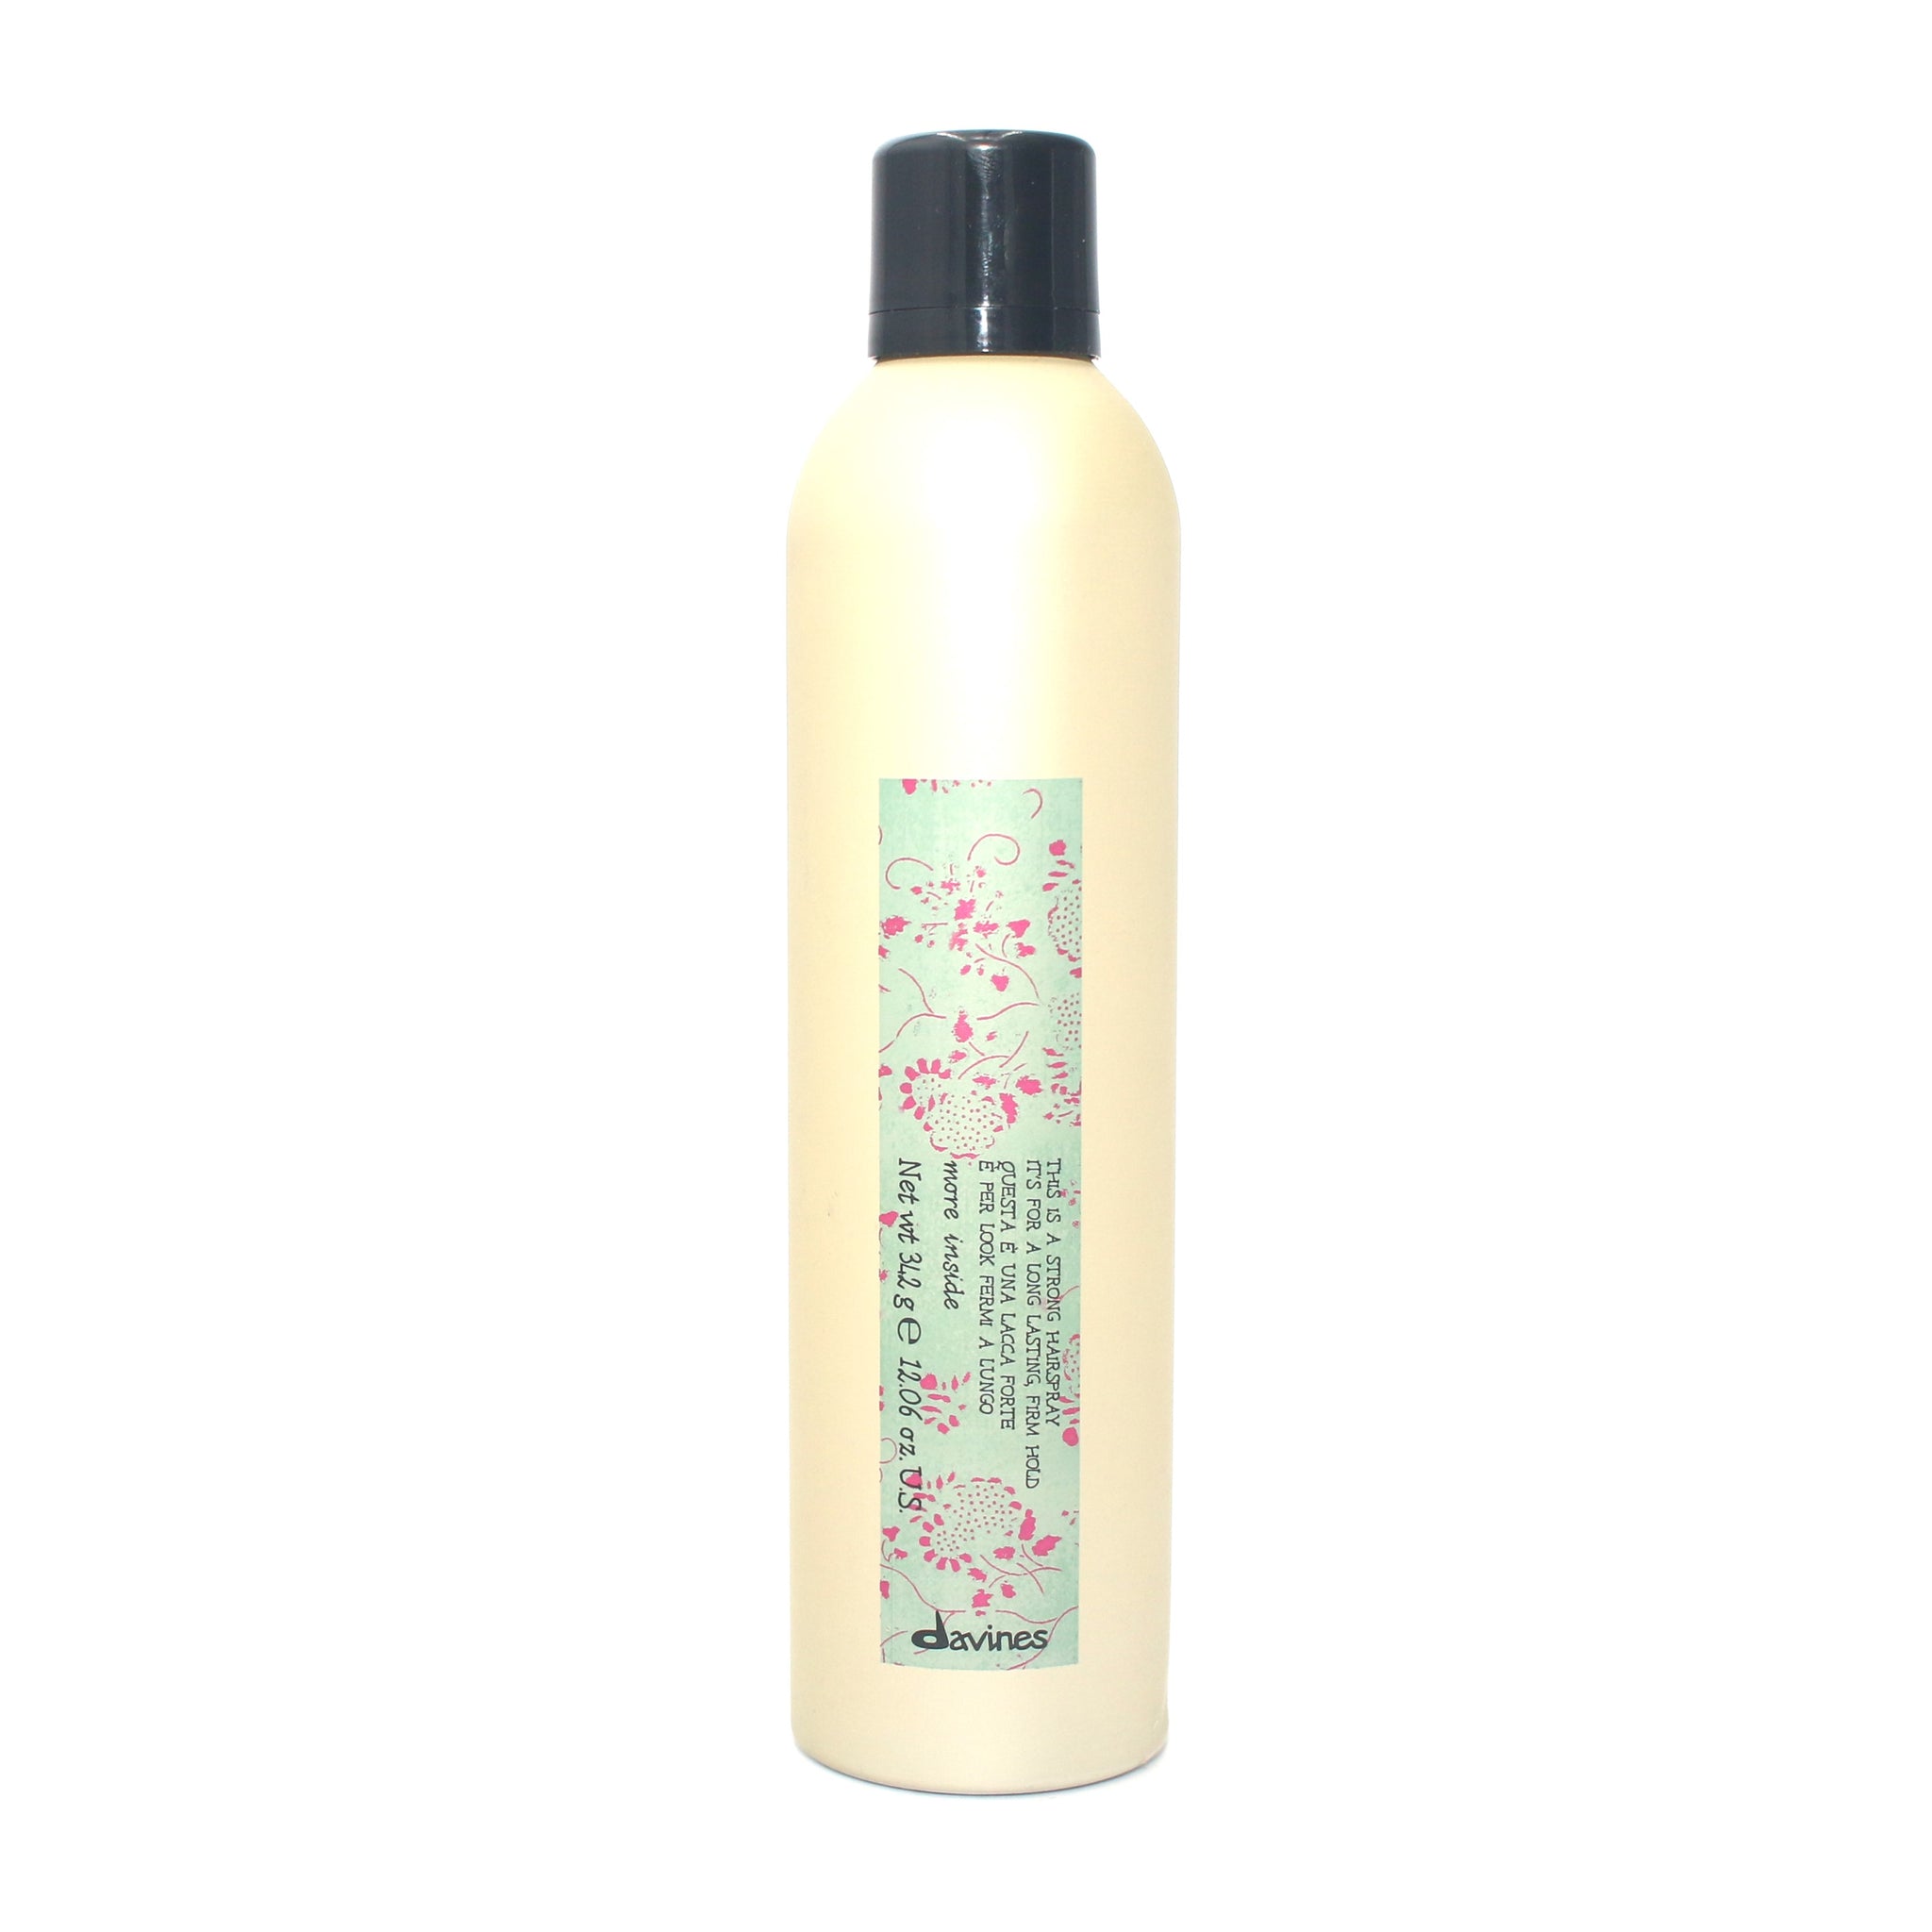 Davines This Is A Strong Hairspray 12 oz